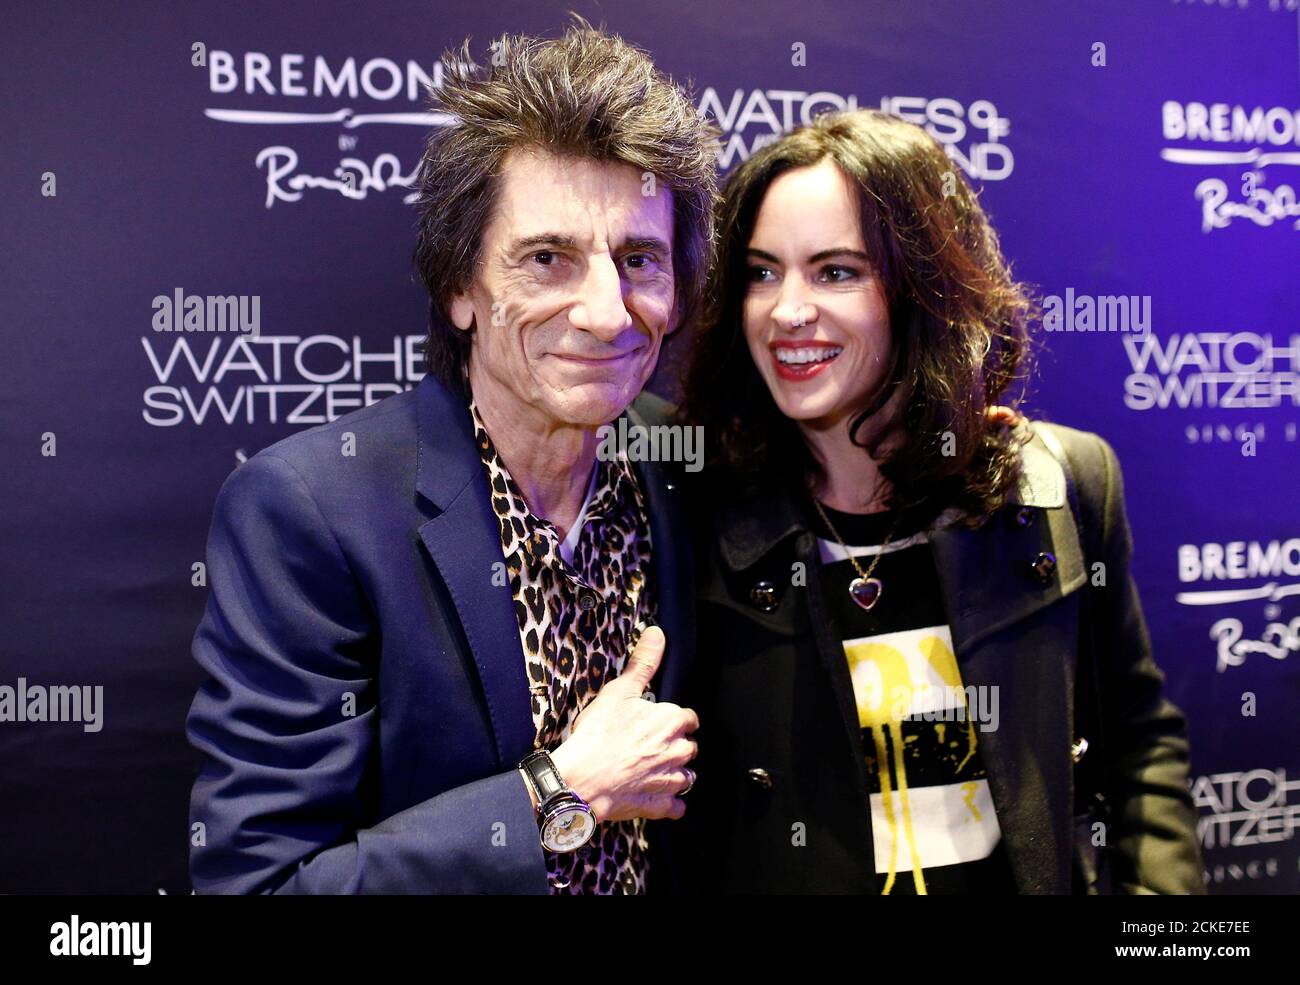 Ronnie Wood of the Rolling Stones poses with one of the 47 limited edition watches he designed in collaboration with Bremont, during a launch event at a watch shop in London, Britain November 14, 2019. REUTERS/Henry Nicholls Stock Photo